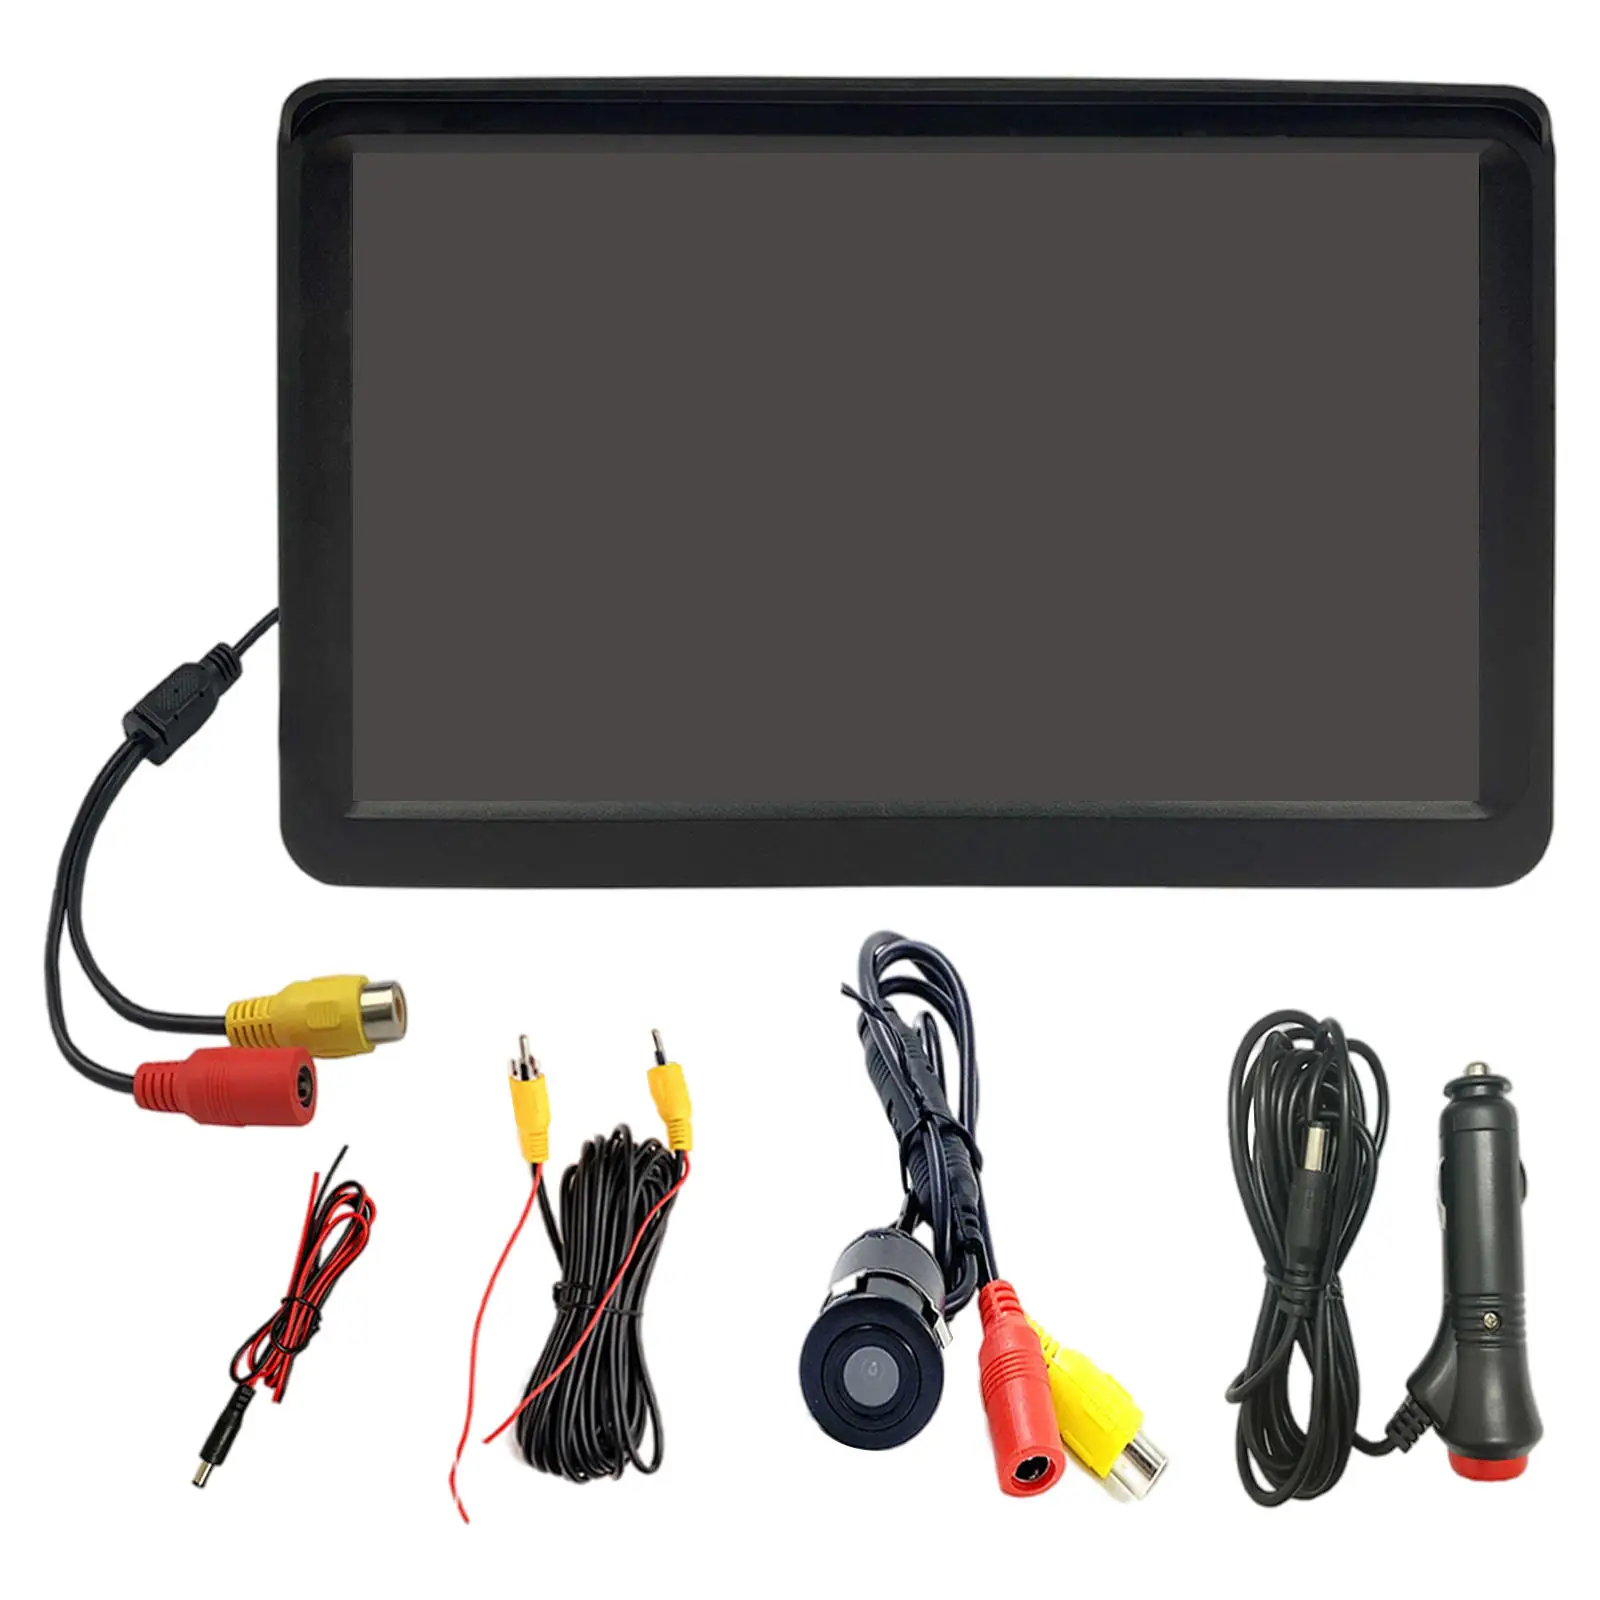 rear view mirror monitor Rear Views Monitor Screen 7 inch Backup 1024x600 Resolution Easy Installation Screen Colorful Round Camera Kit Truck Parking SUV car headrest dvd player